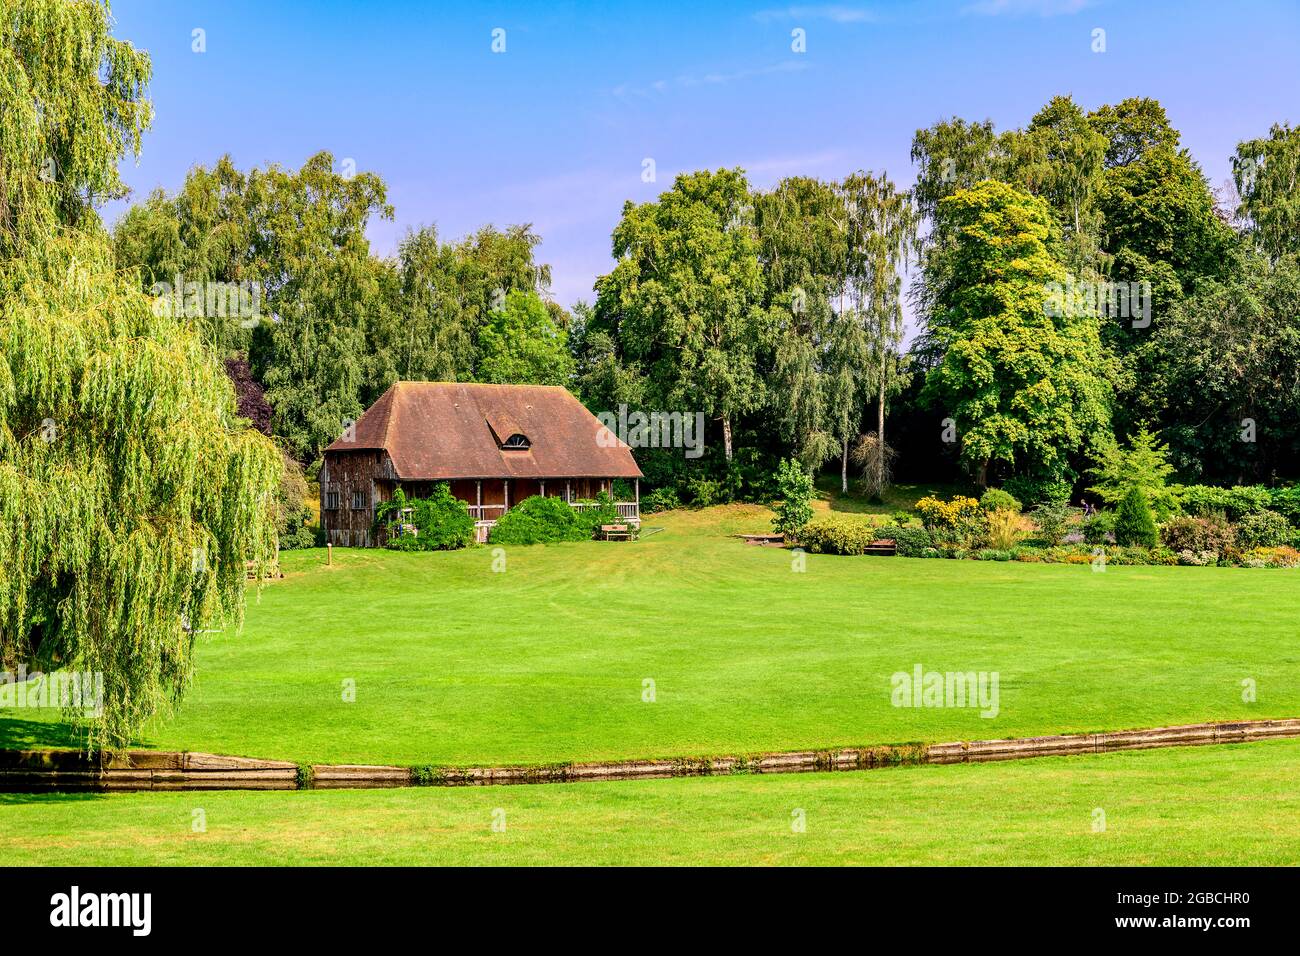 Dilapidated cottage and field in the grounds of Leeds castle kent UK Stock Photo